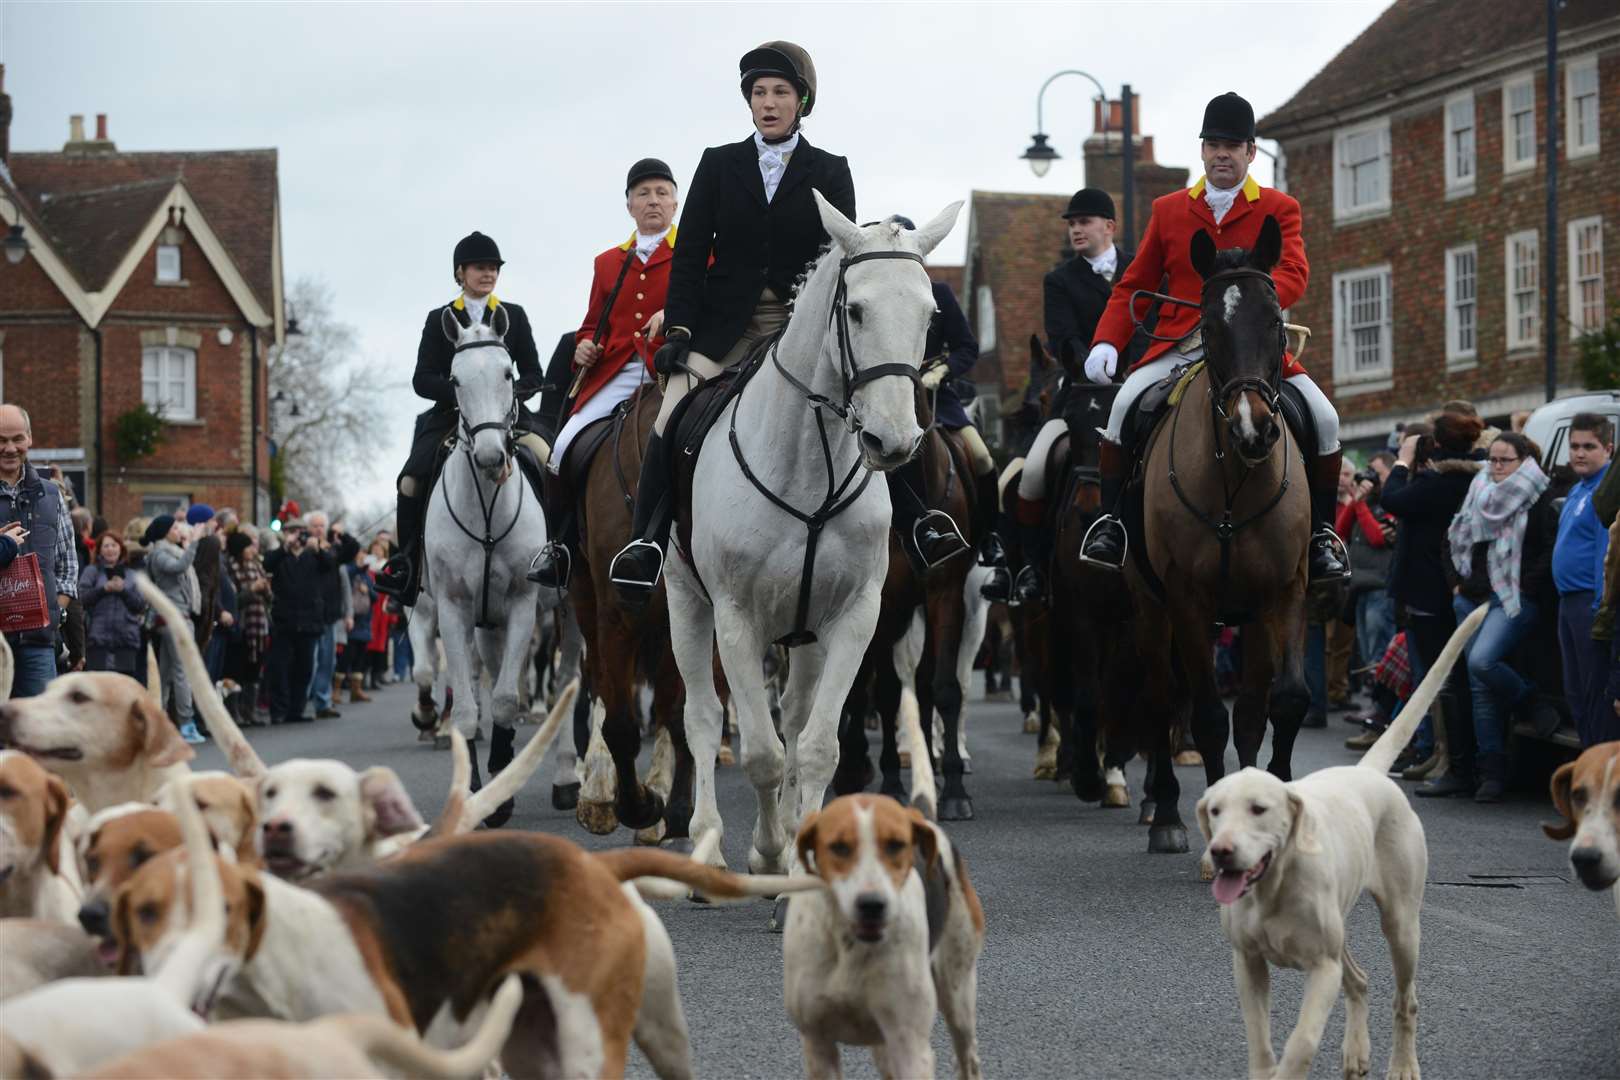 The annual Boxing Day hunt in Tenterden